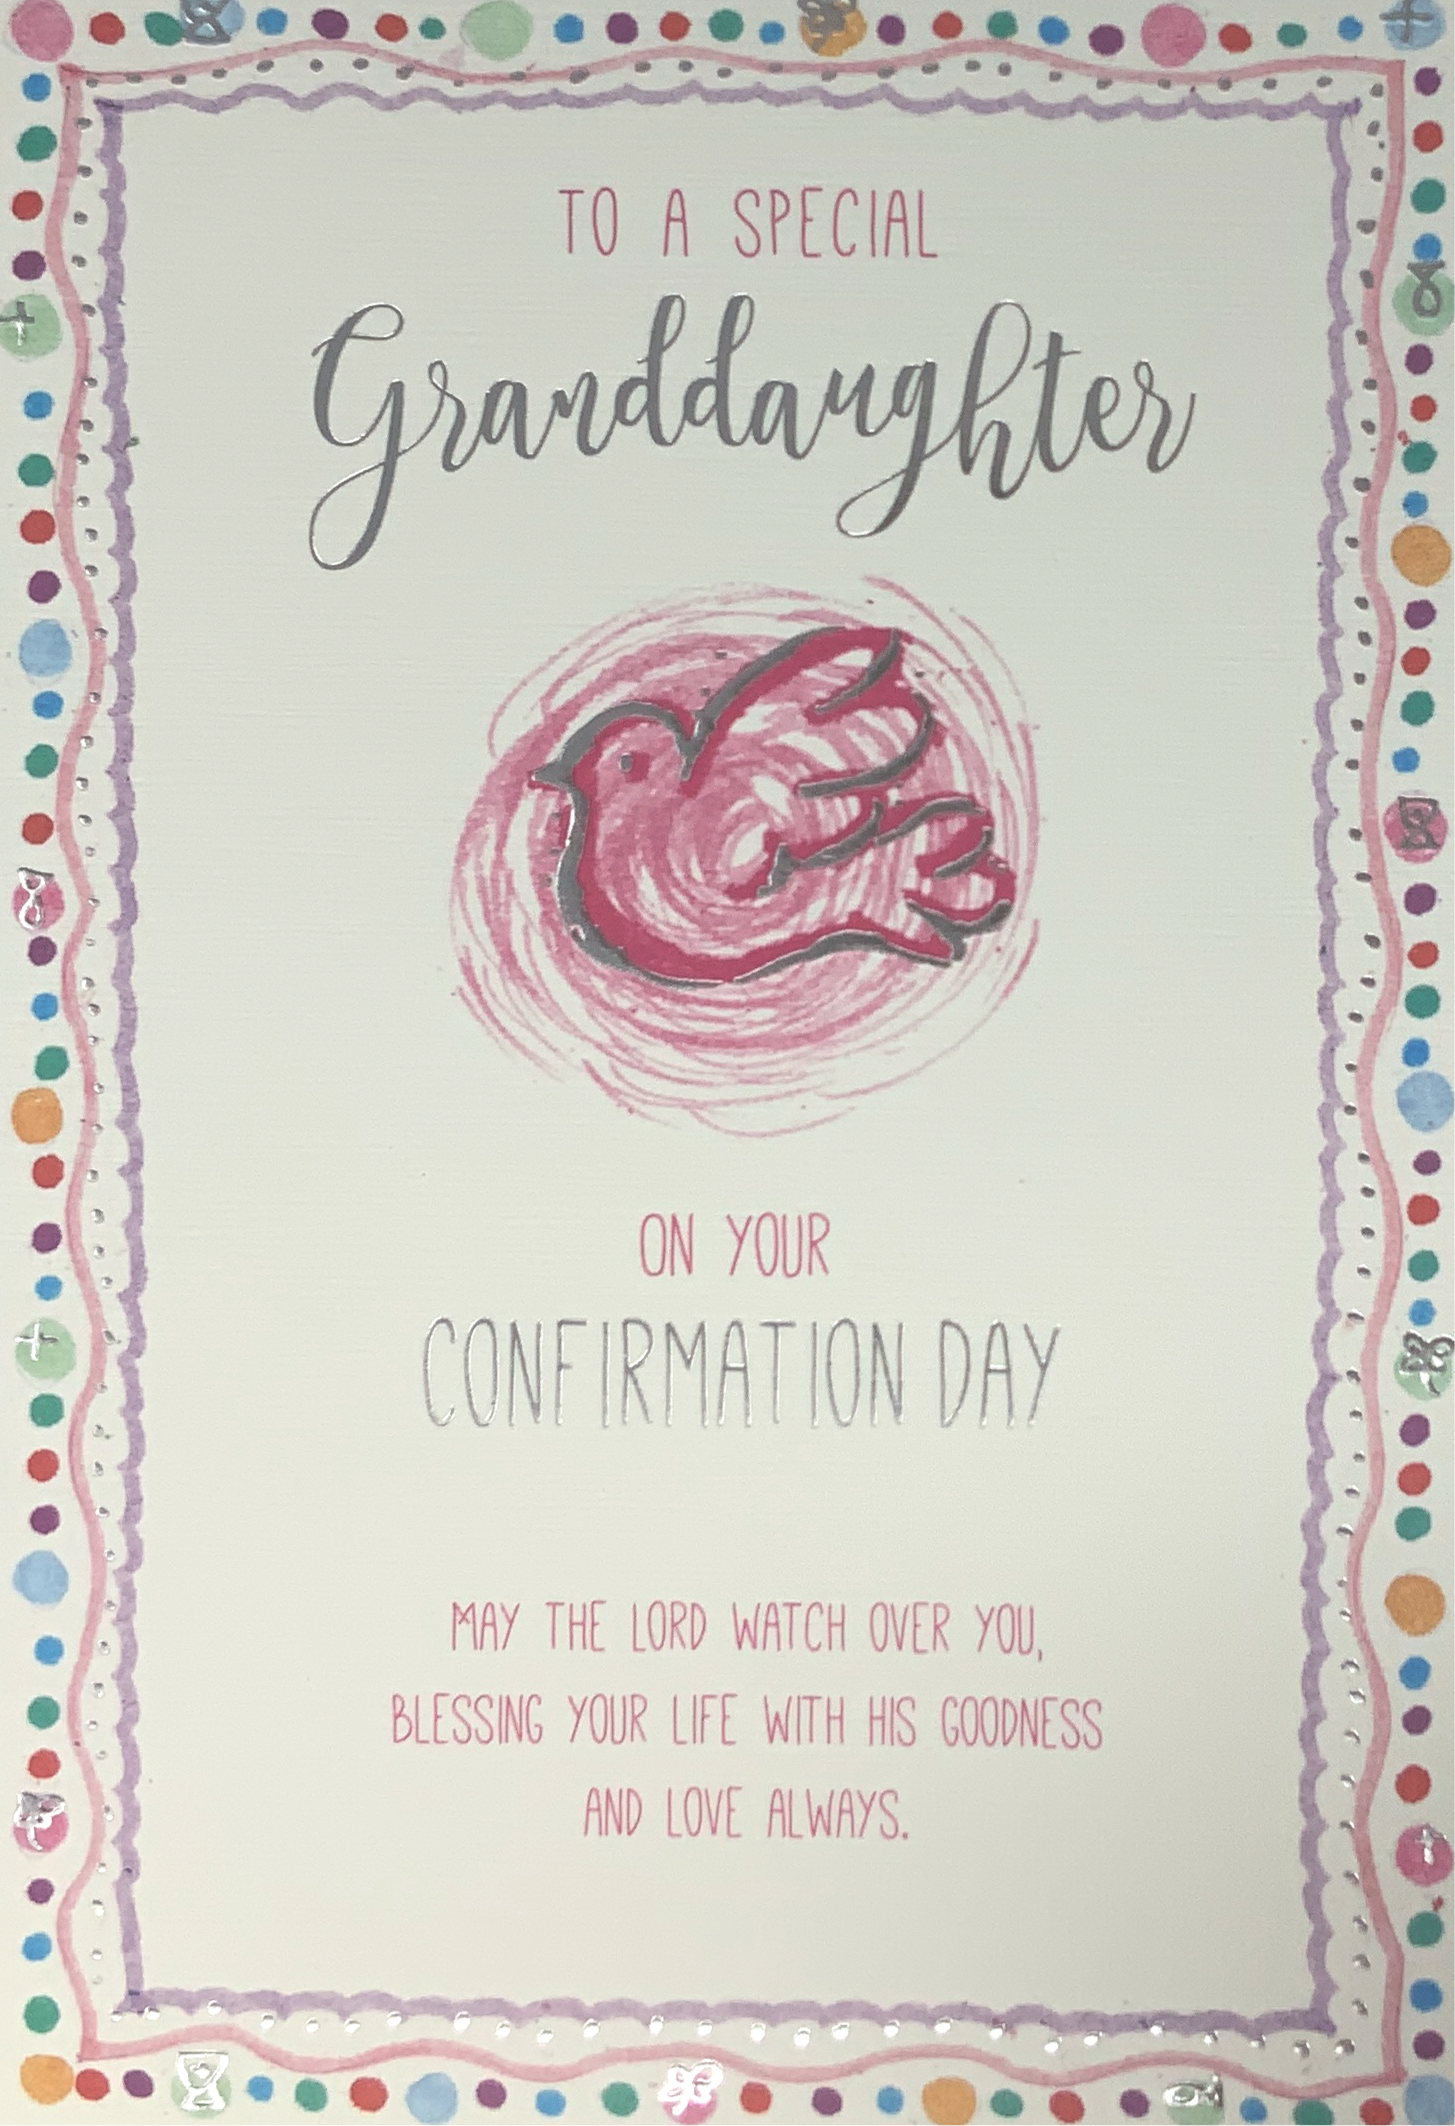 Confirmation Card - To A Special Granddaughter